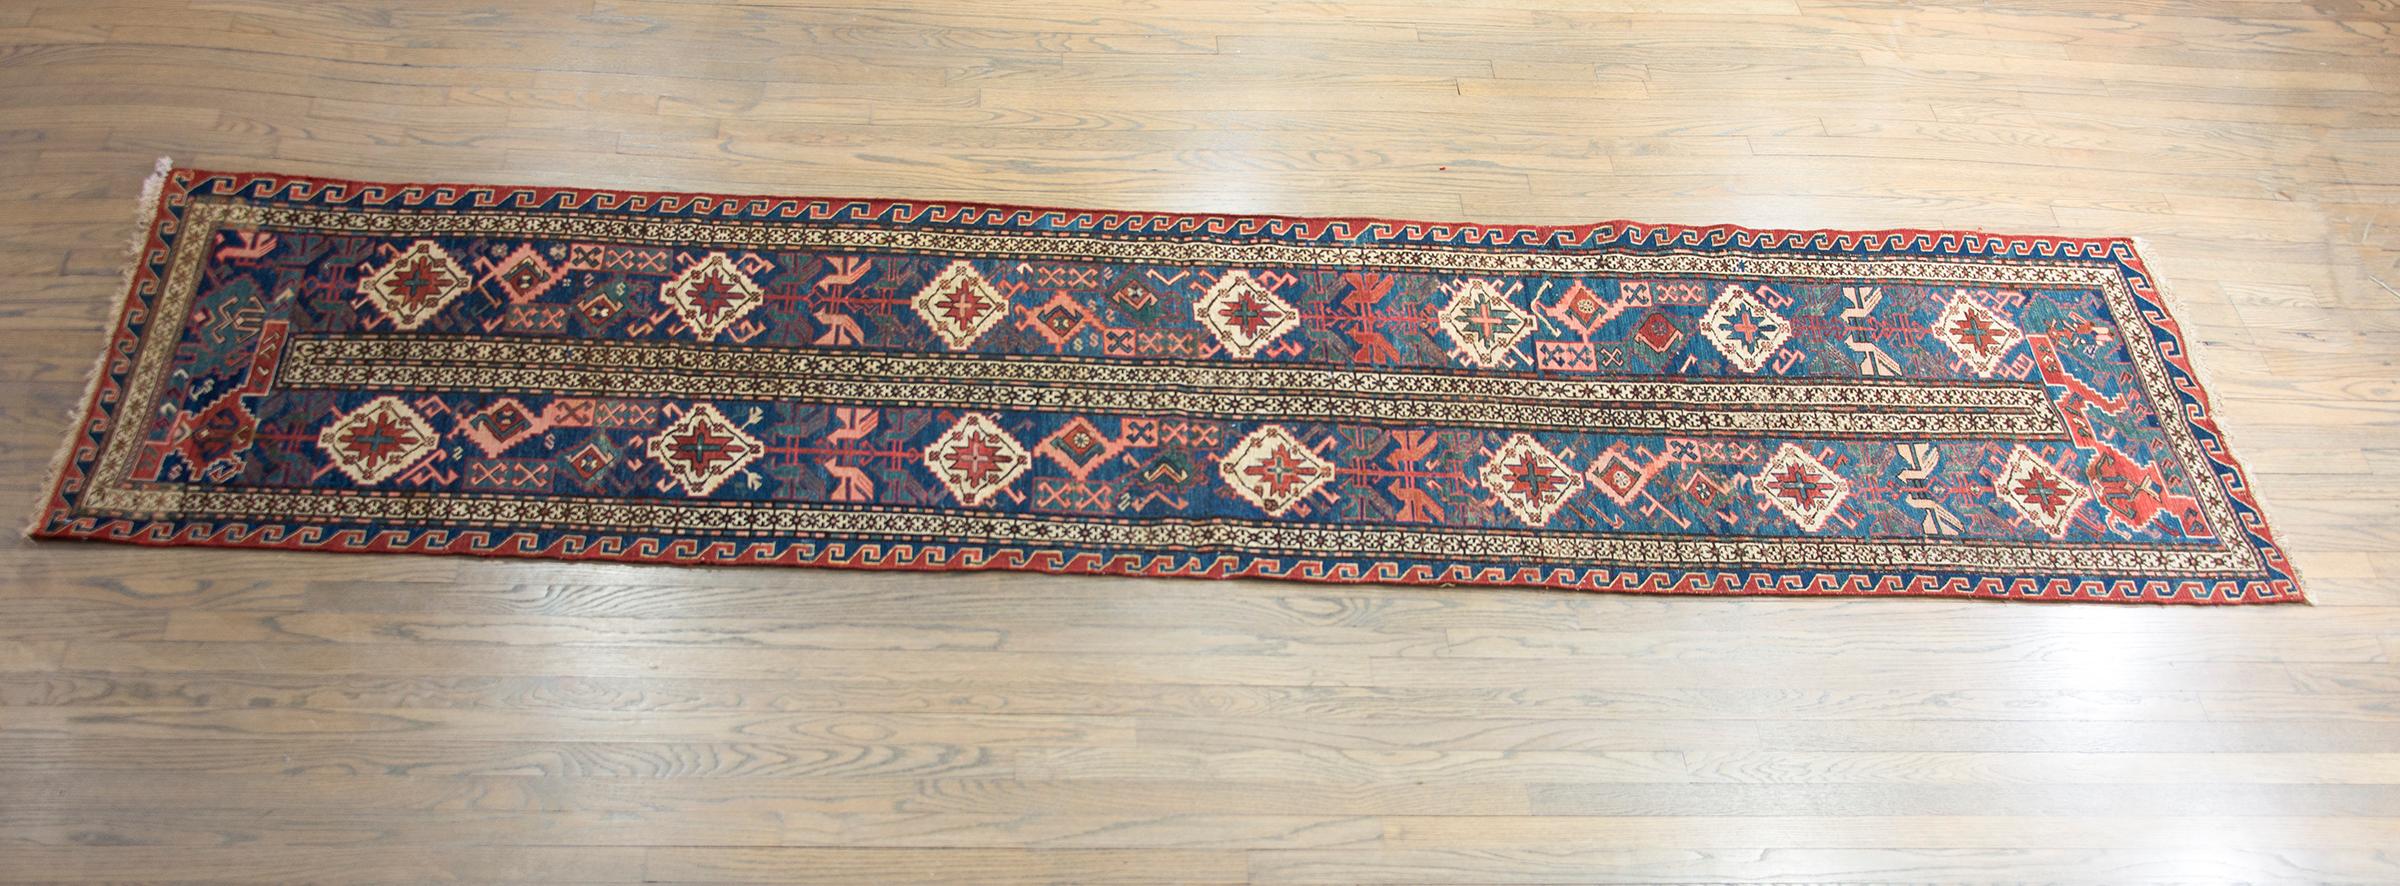 Early 20th Century Persian Soumak Runner For Sale 9